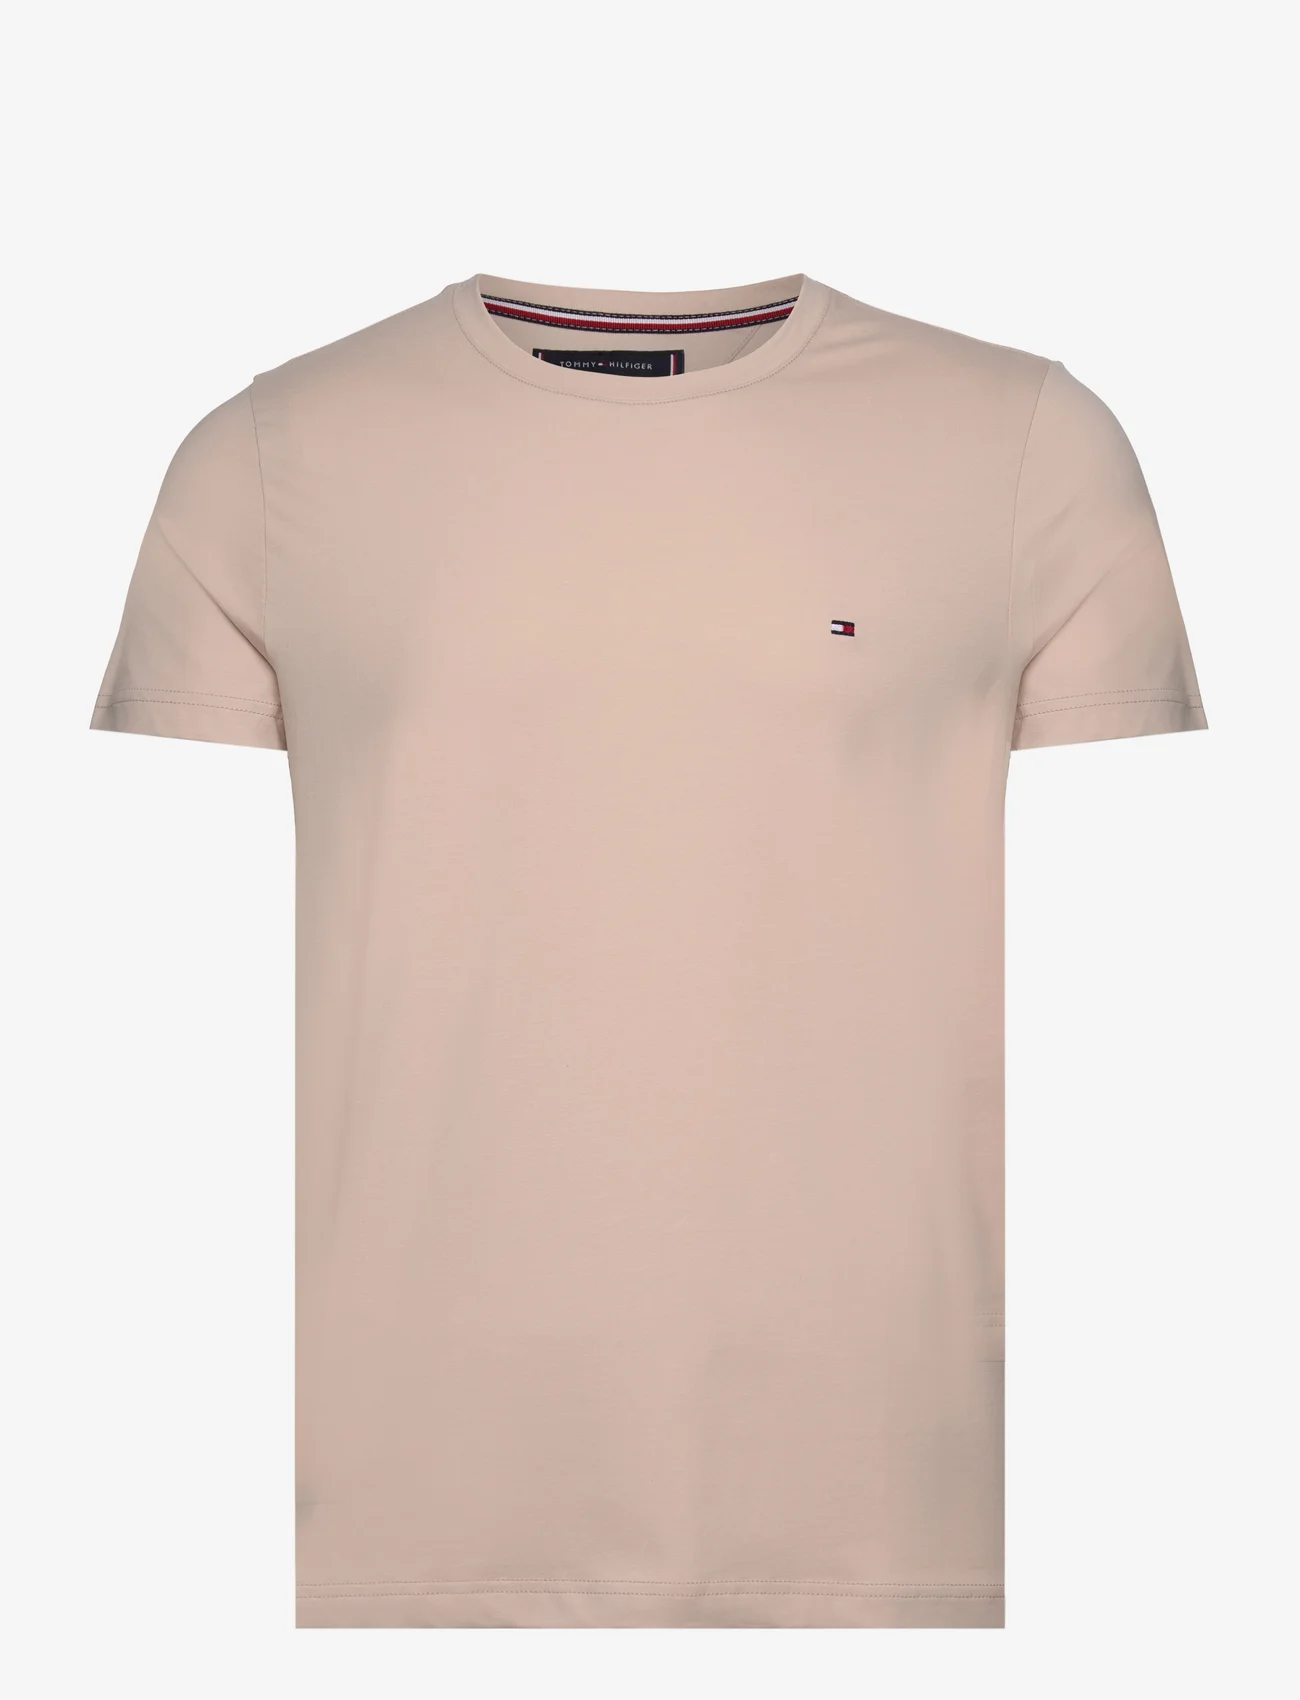 Tommy Hilfiger - STRETCH SLIM FIT TEE - lowest prices - cashmere creme - 0